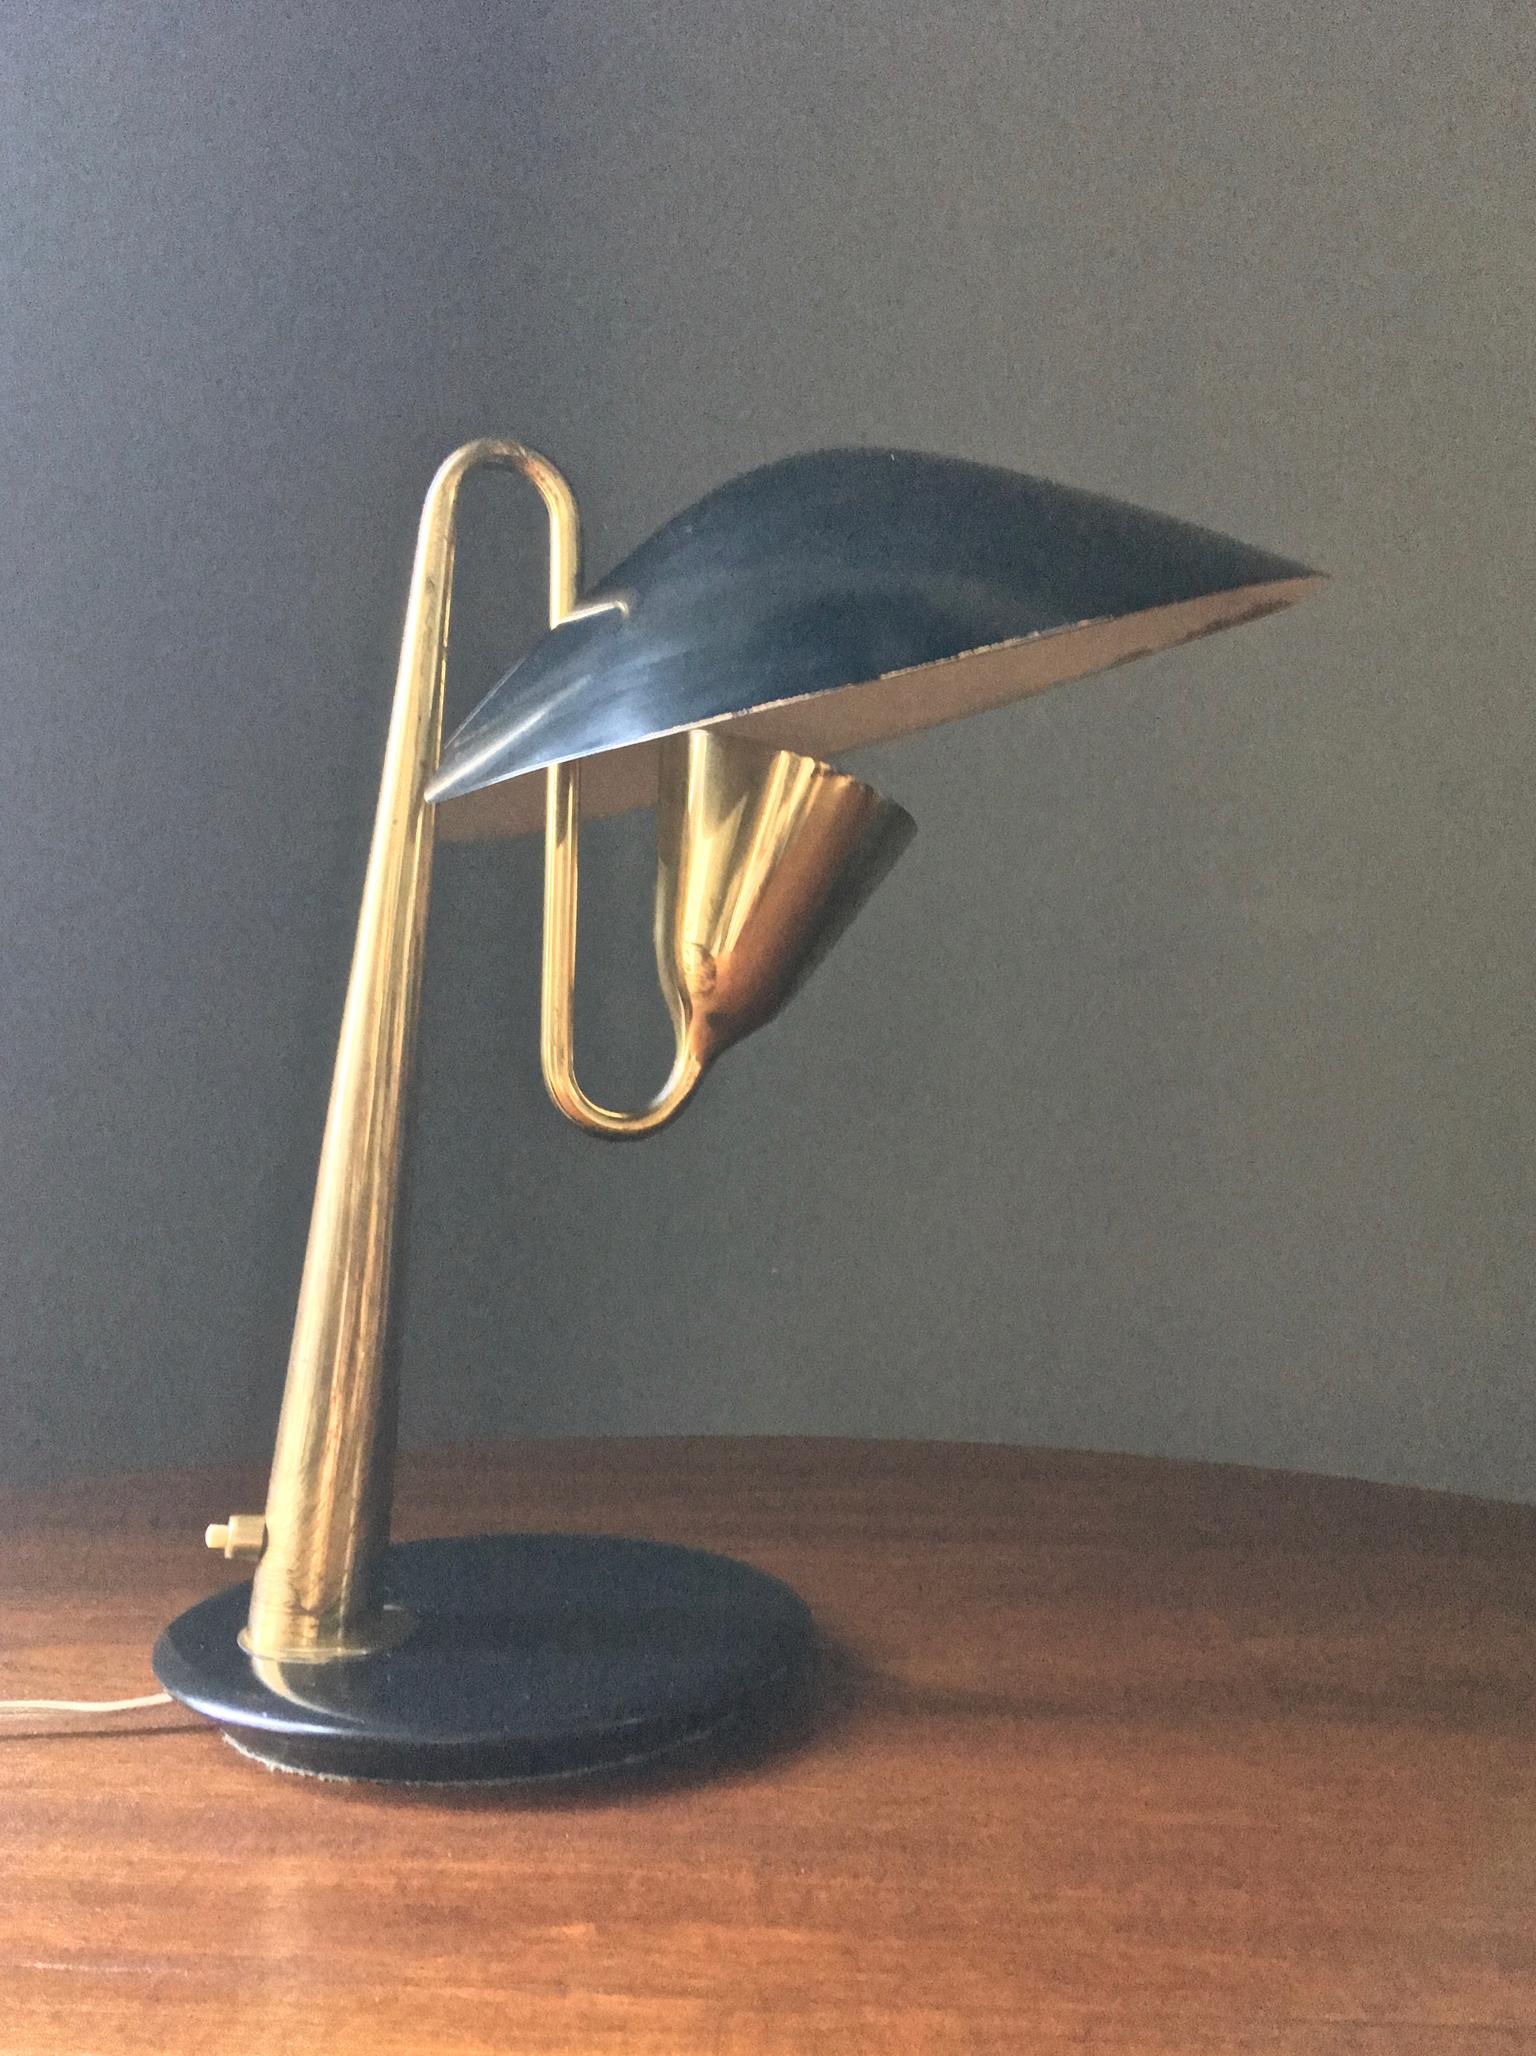 Brass table or desk lamp, with black shade and base, attributed to Giuseppe Ostuni for O-Luce (or Oluce) of Italy, 1950s.

A beautiful design, very nicely made, which allows the circular shade to be tilted through a joint at the neck. The lamp is